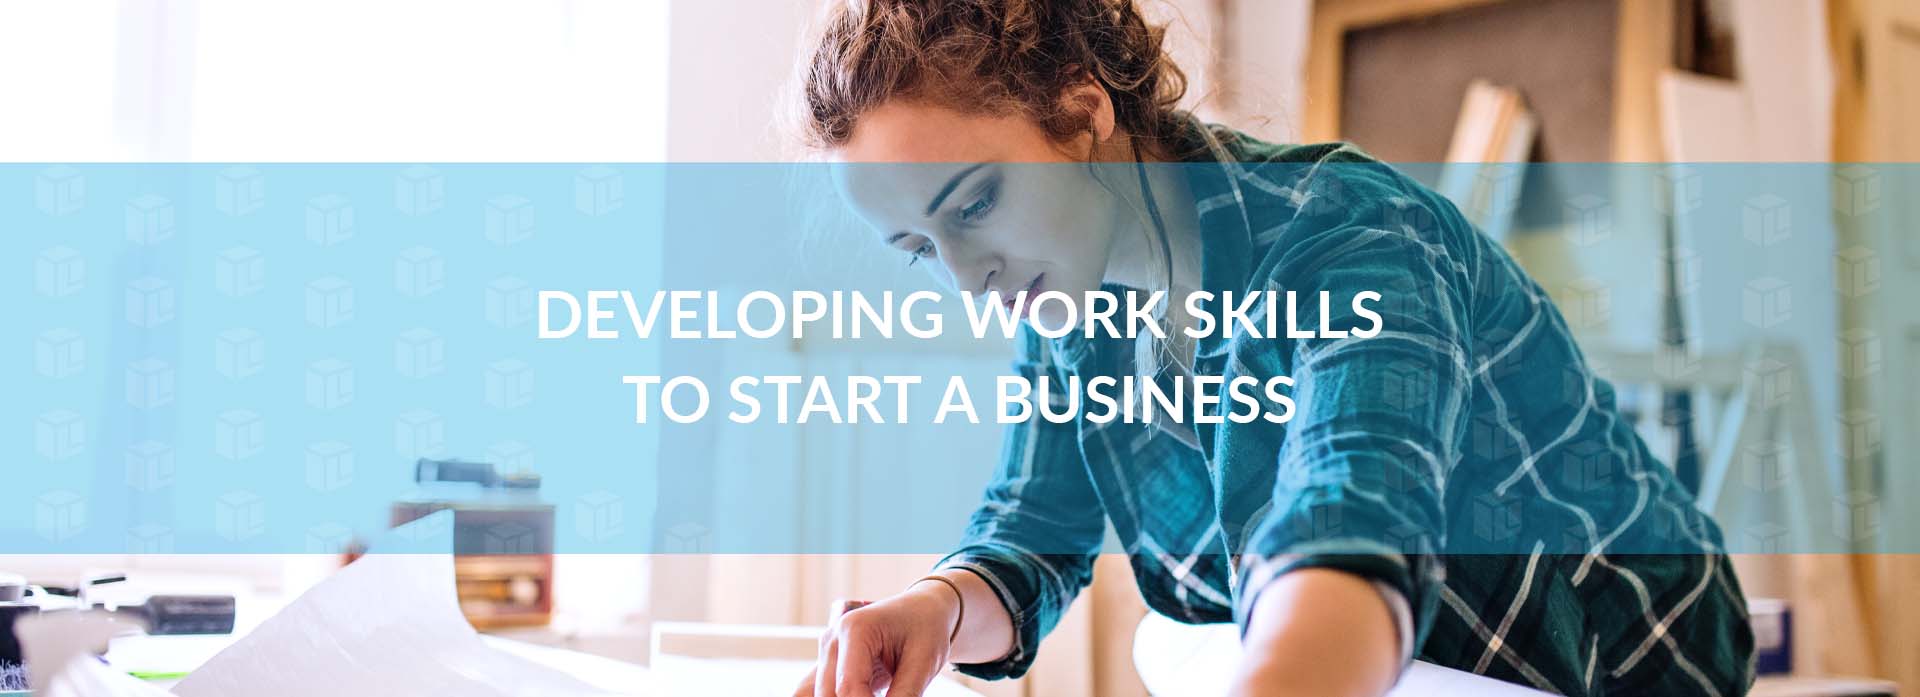 Developing Work Skills To Start A Business